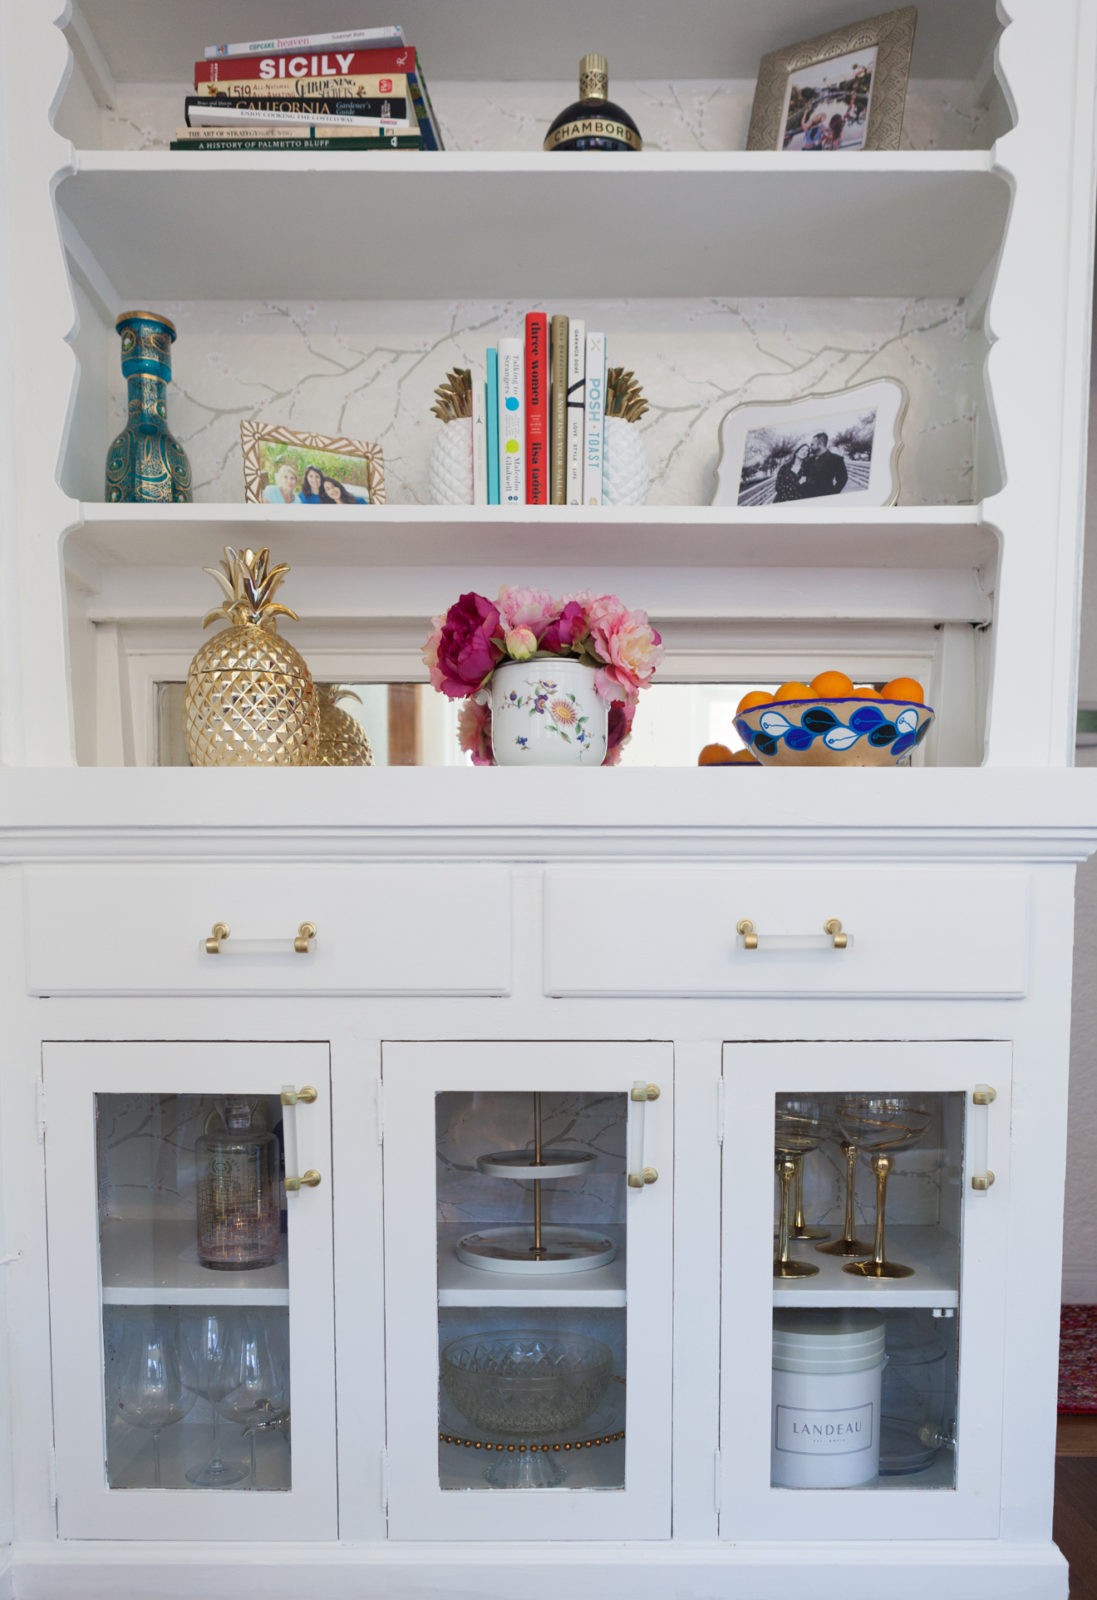 DIY Home Decor hutch remodel by Los Angeles Home Decor Blogger Laura Lily,